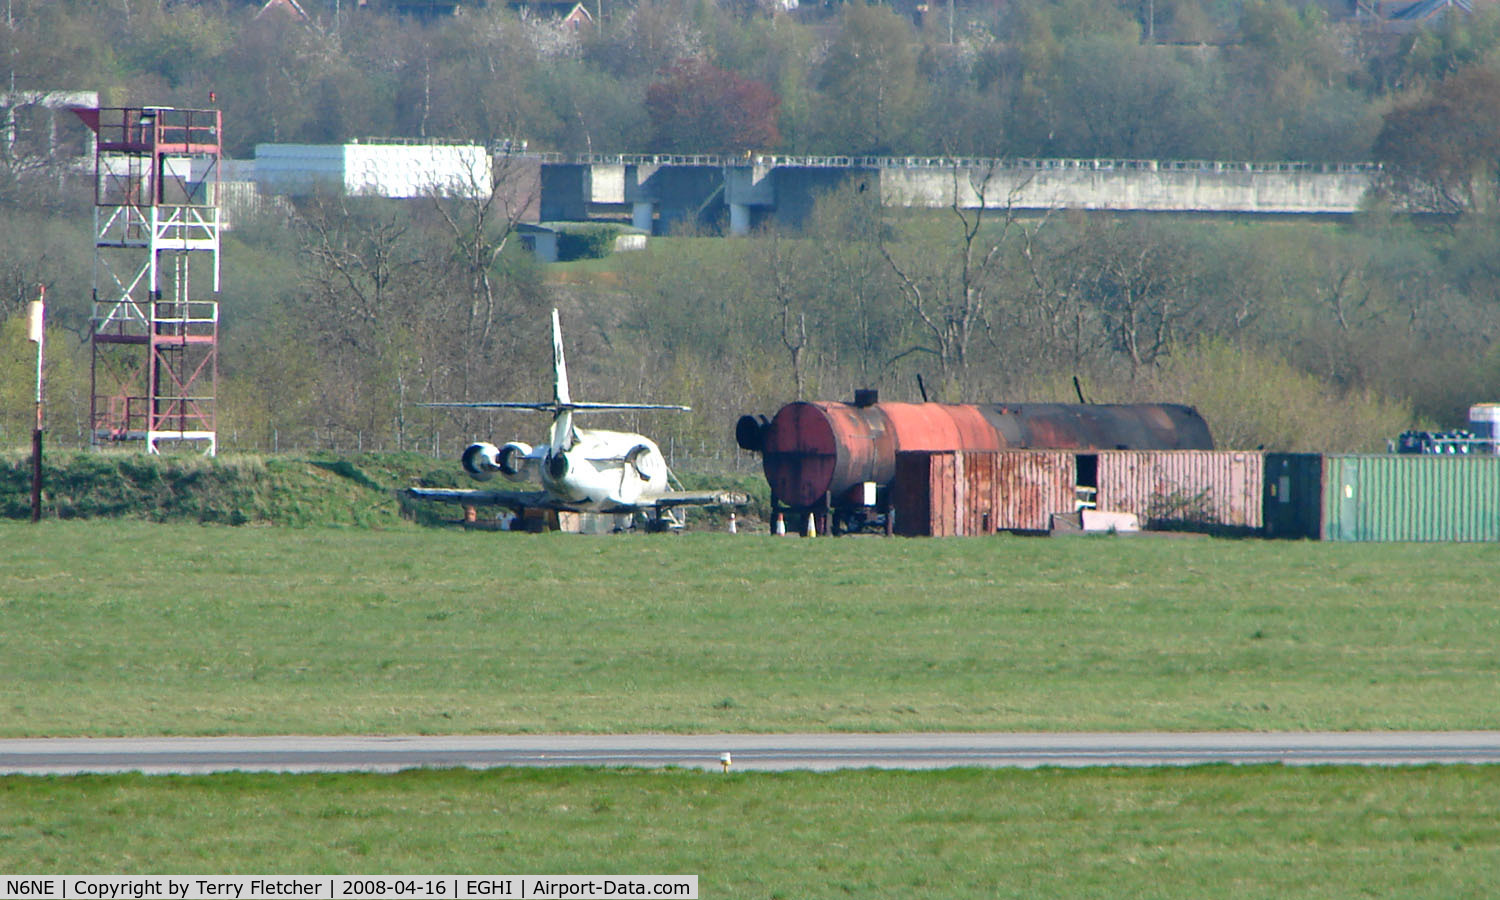 N6NE, 1961 Lockheed L-1329 Jetstar 731 C/N 5006, This Lockheed Jetstar was involved in a landing accident at Southampton many years ago - when it was WFU it was moved to the fire dump - and amazingly is still standing !!!